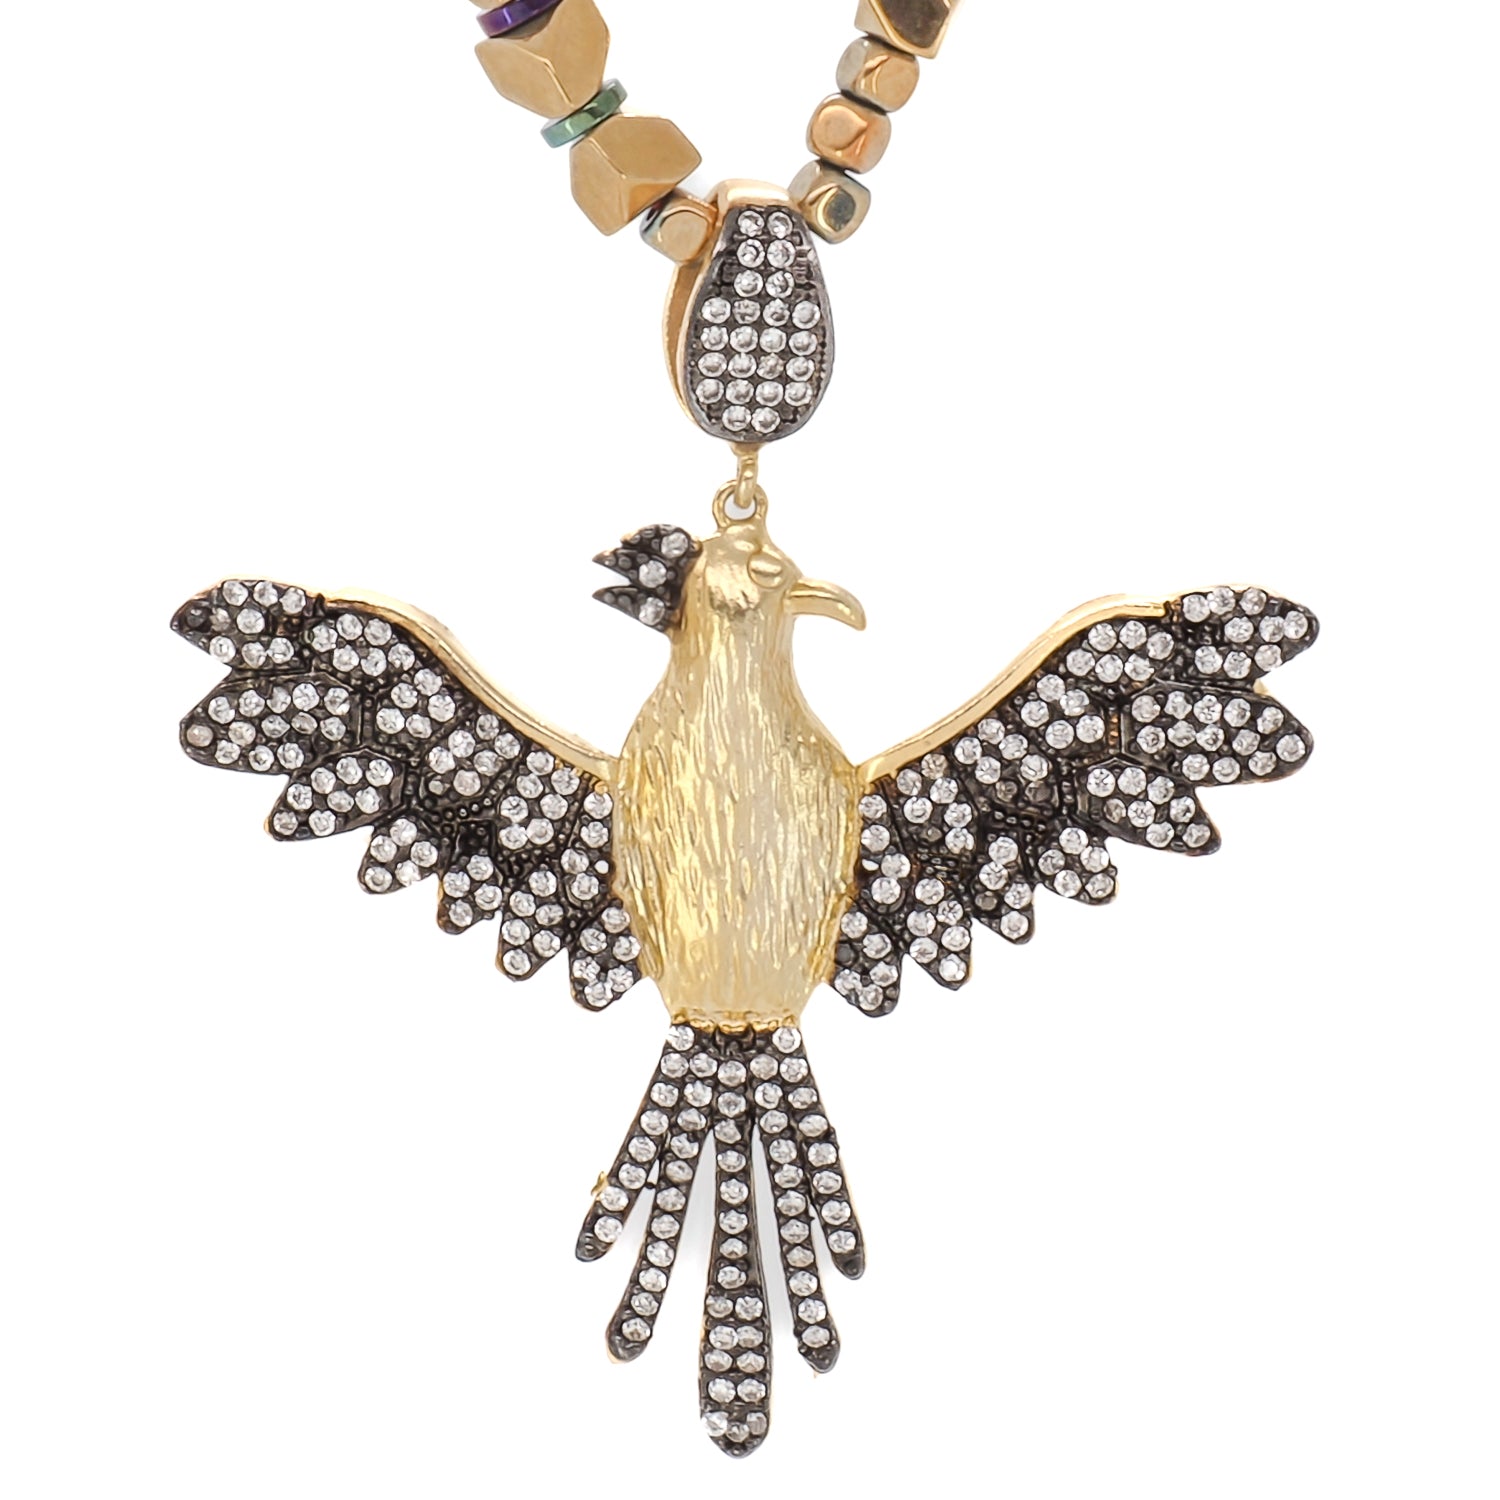 An exquisite necklace embodying the concepts of renewal and transformation through the Phoenix symbol.